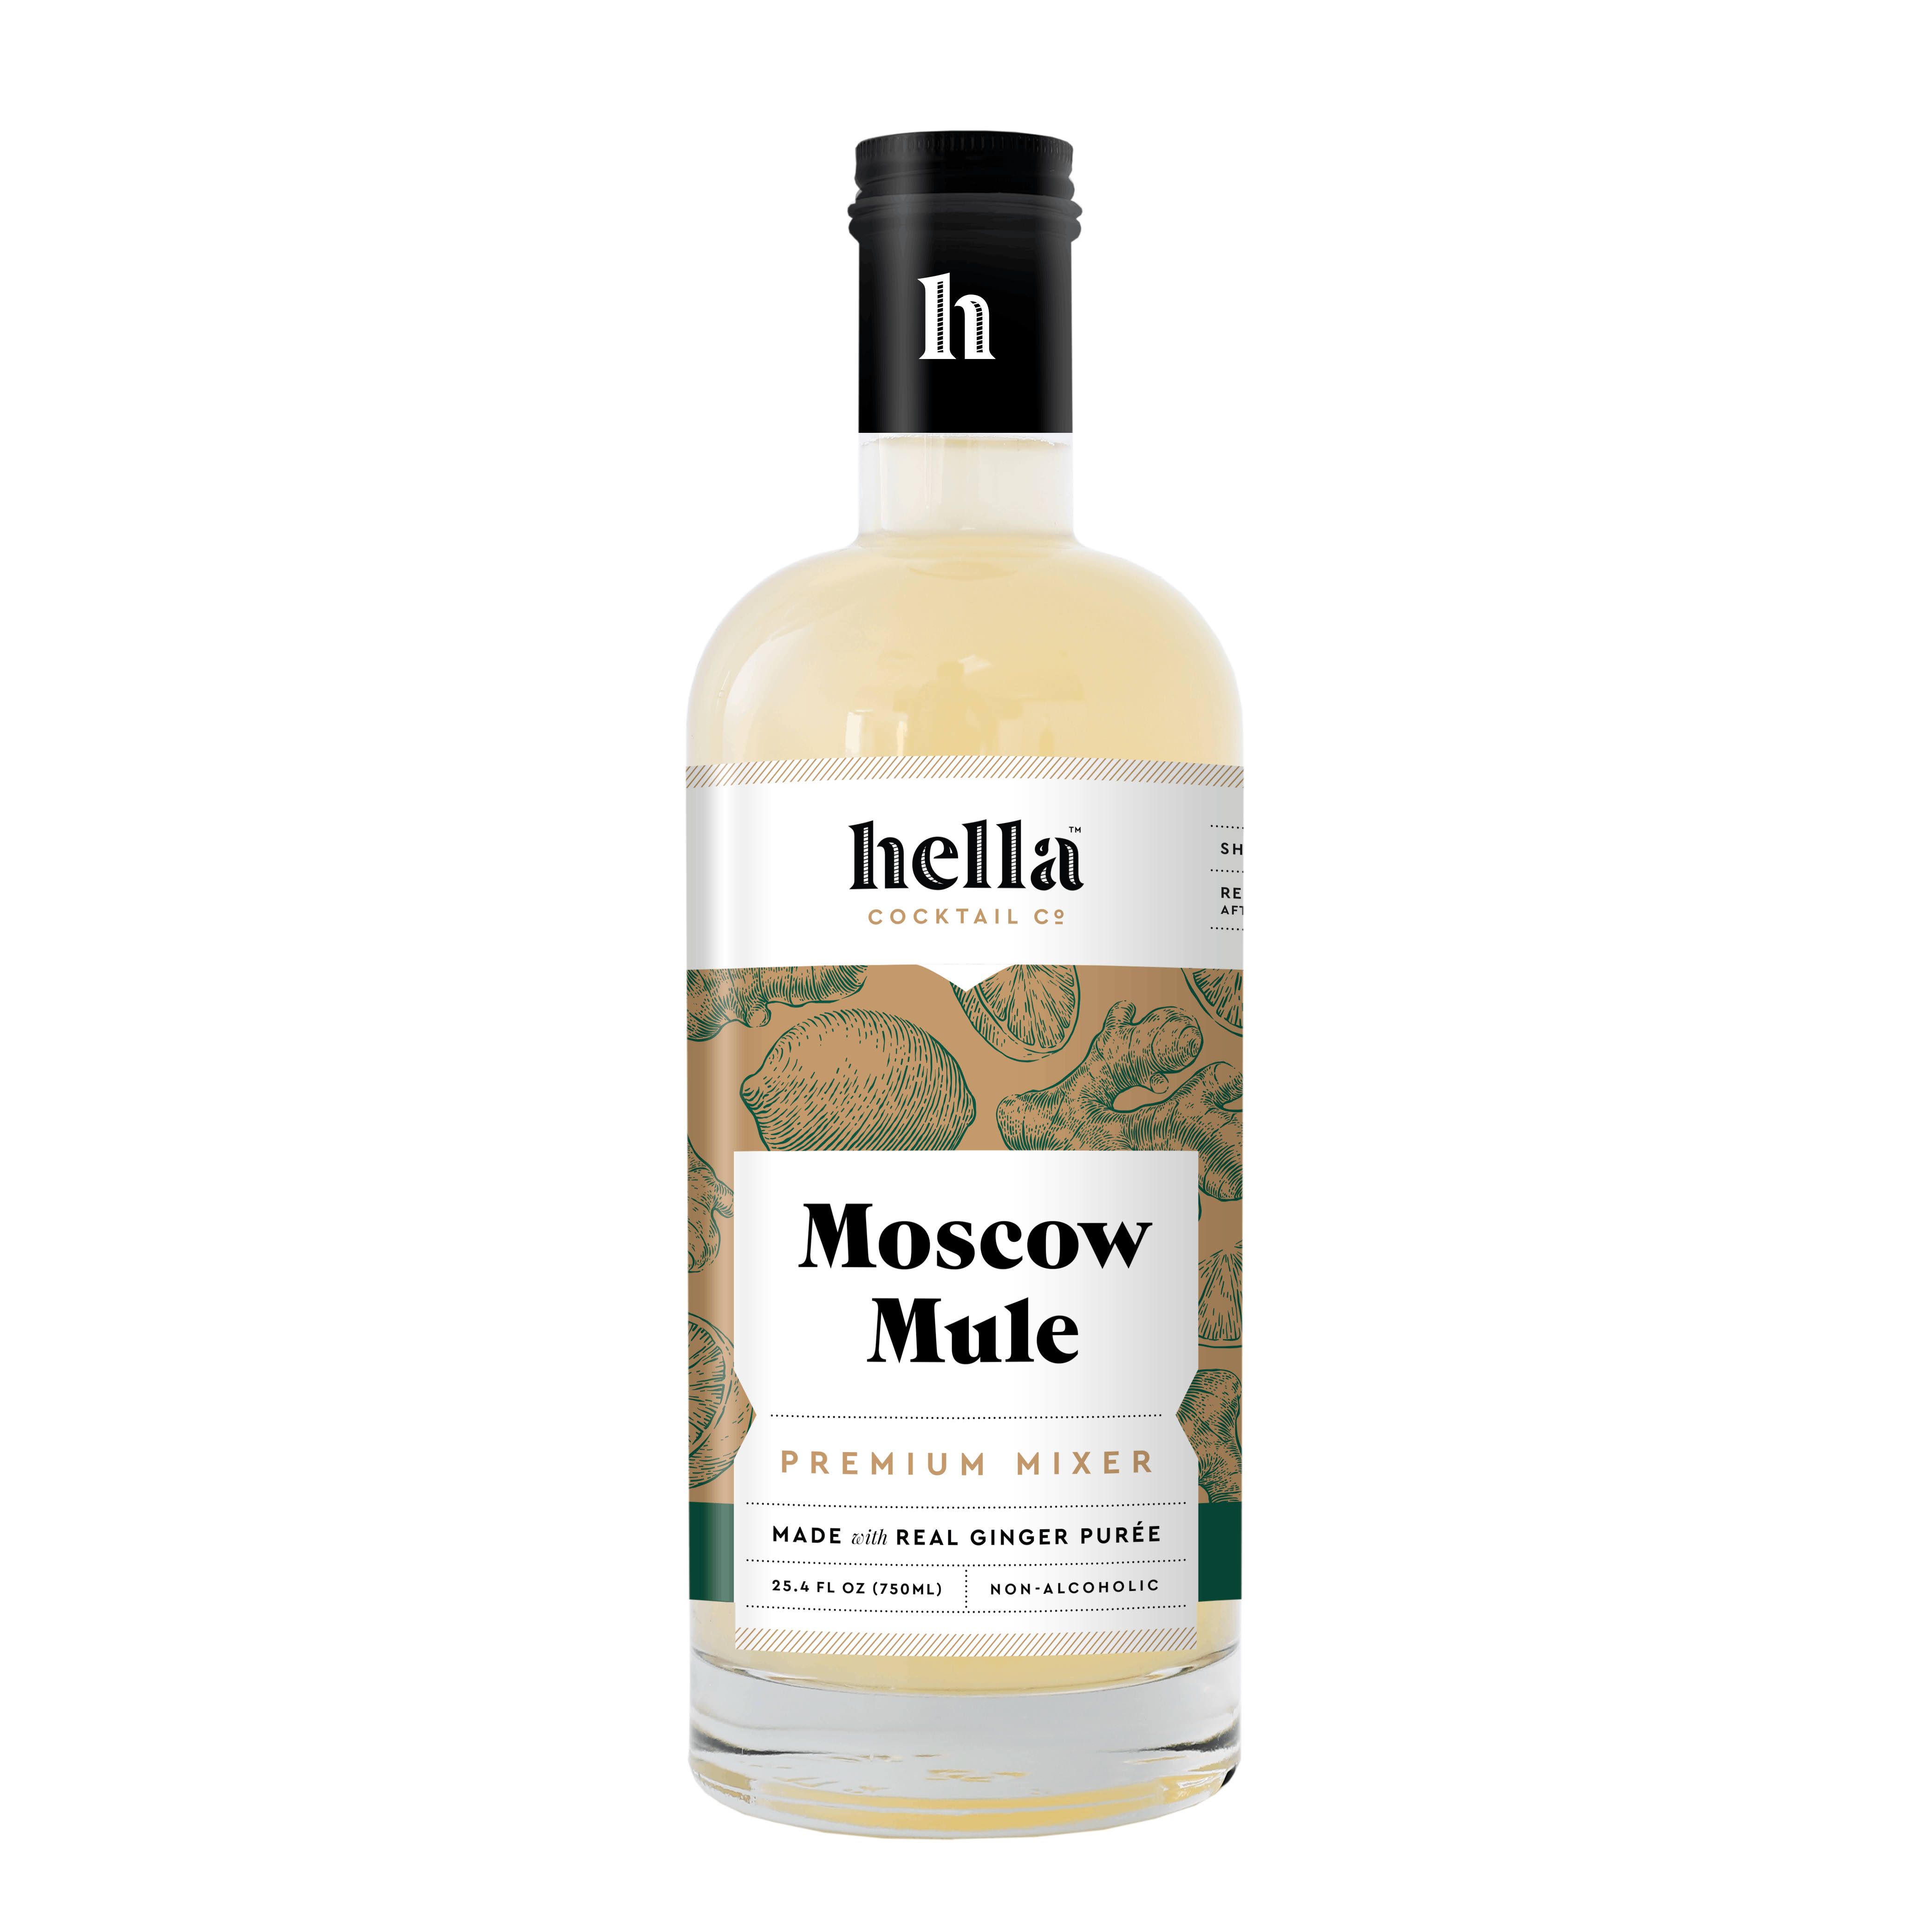 Hella Moscow Mule Cocktail Mixer - Ginger Lime, 750ml